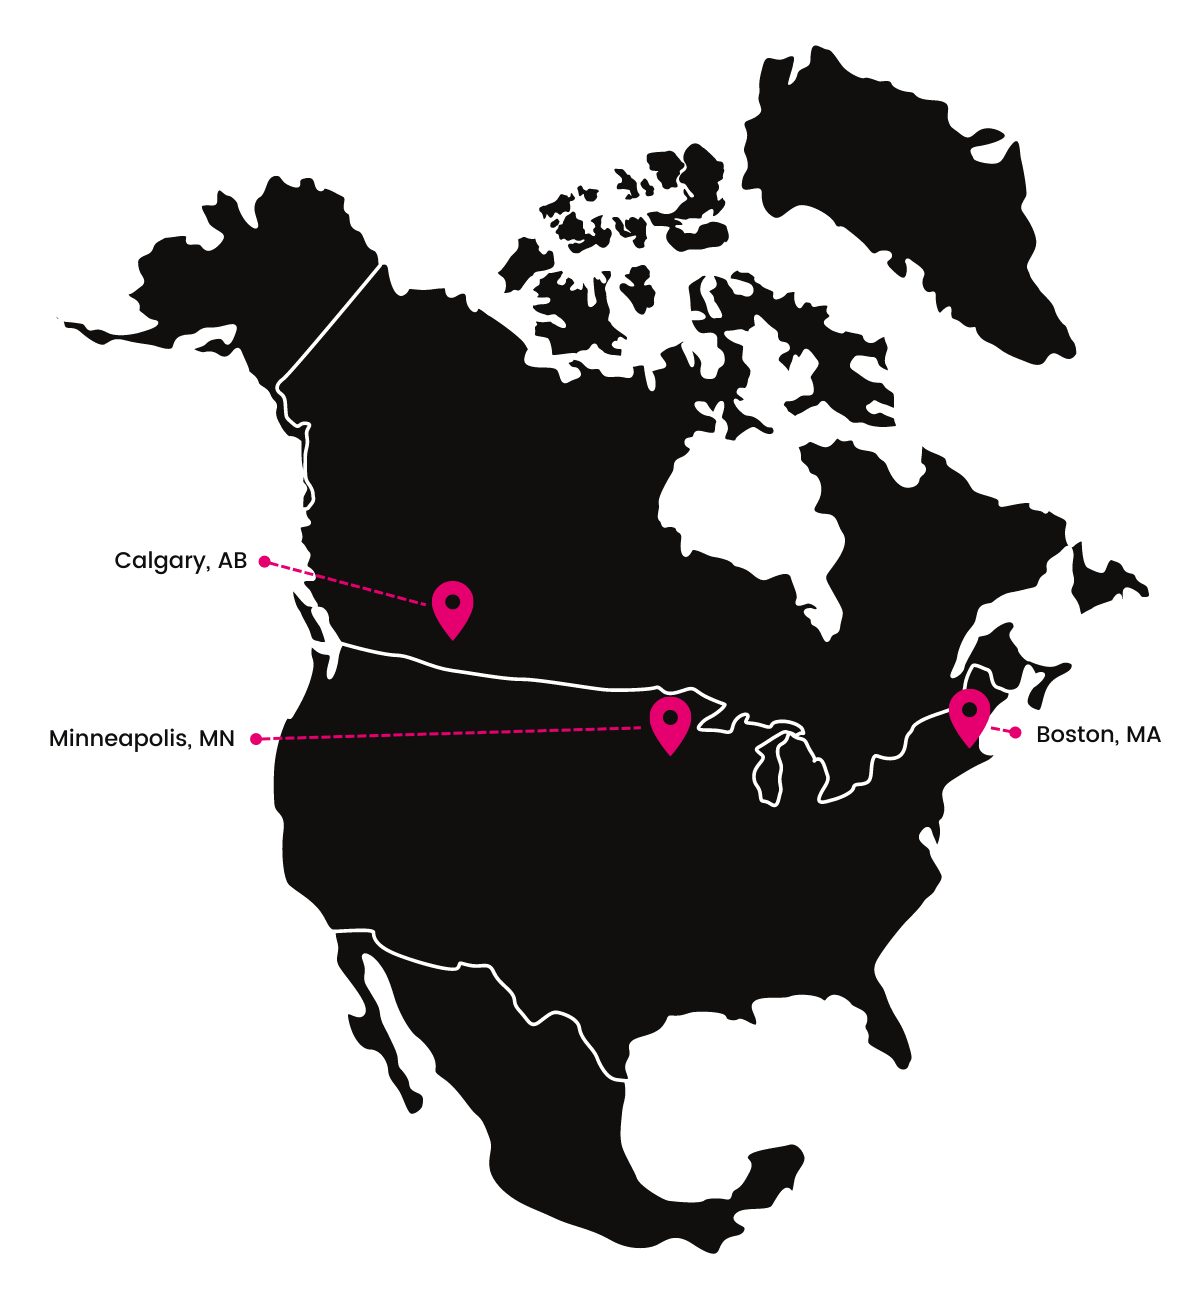 North American map for 3Play Media and 3Play Media Canada offices: Boston and Minneapolis (US) and Calgary (Canada).